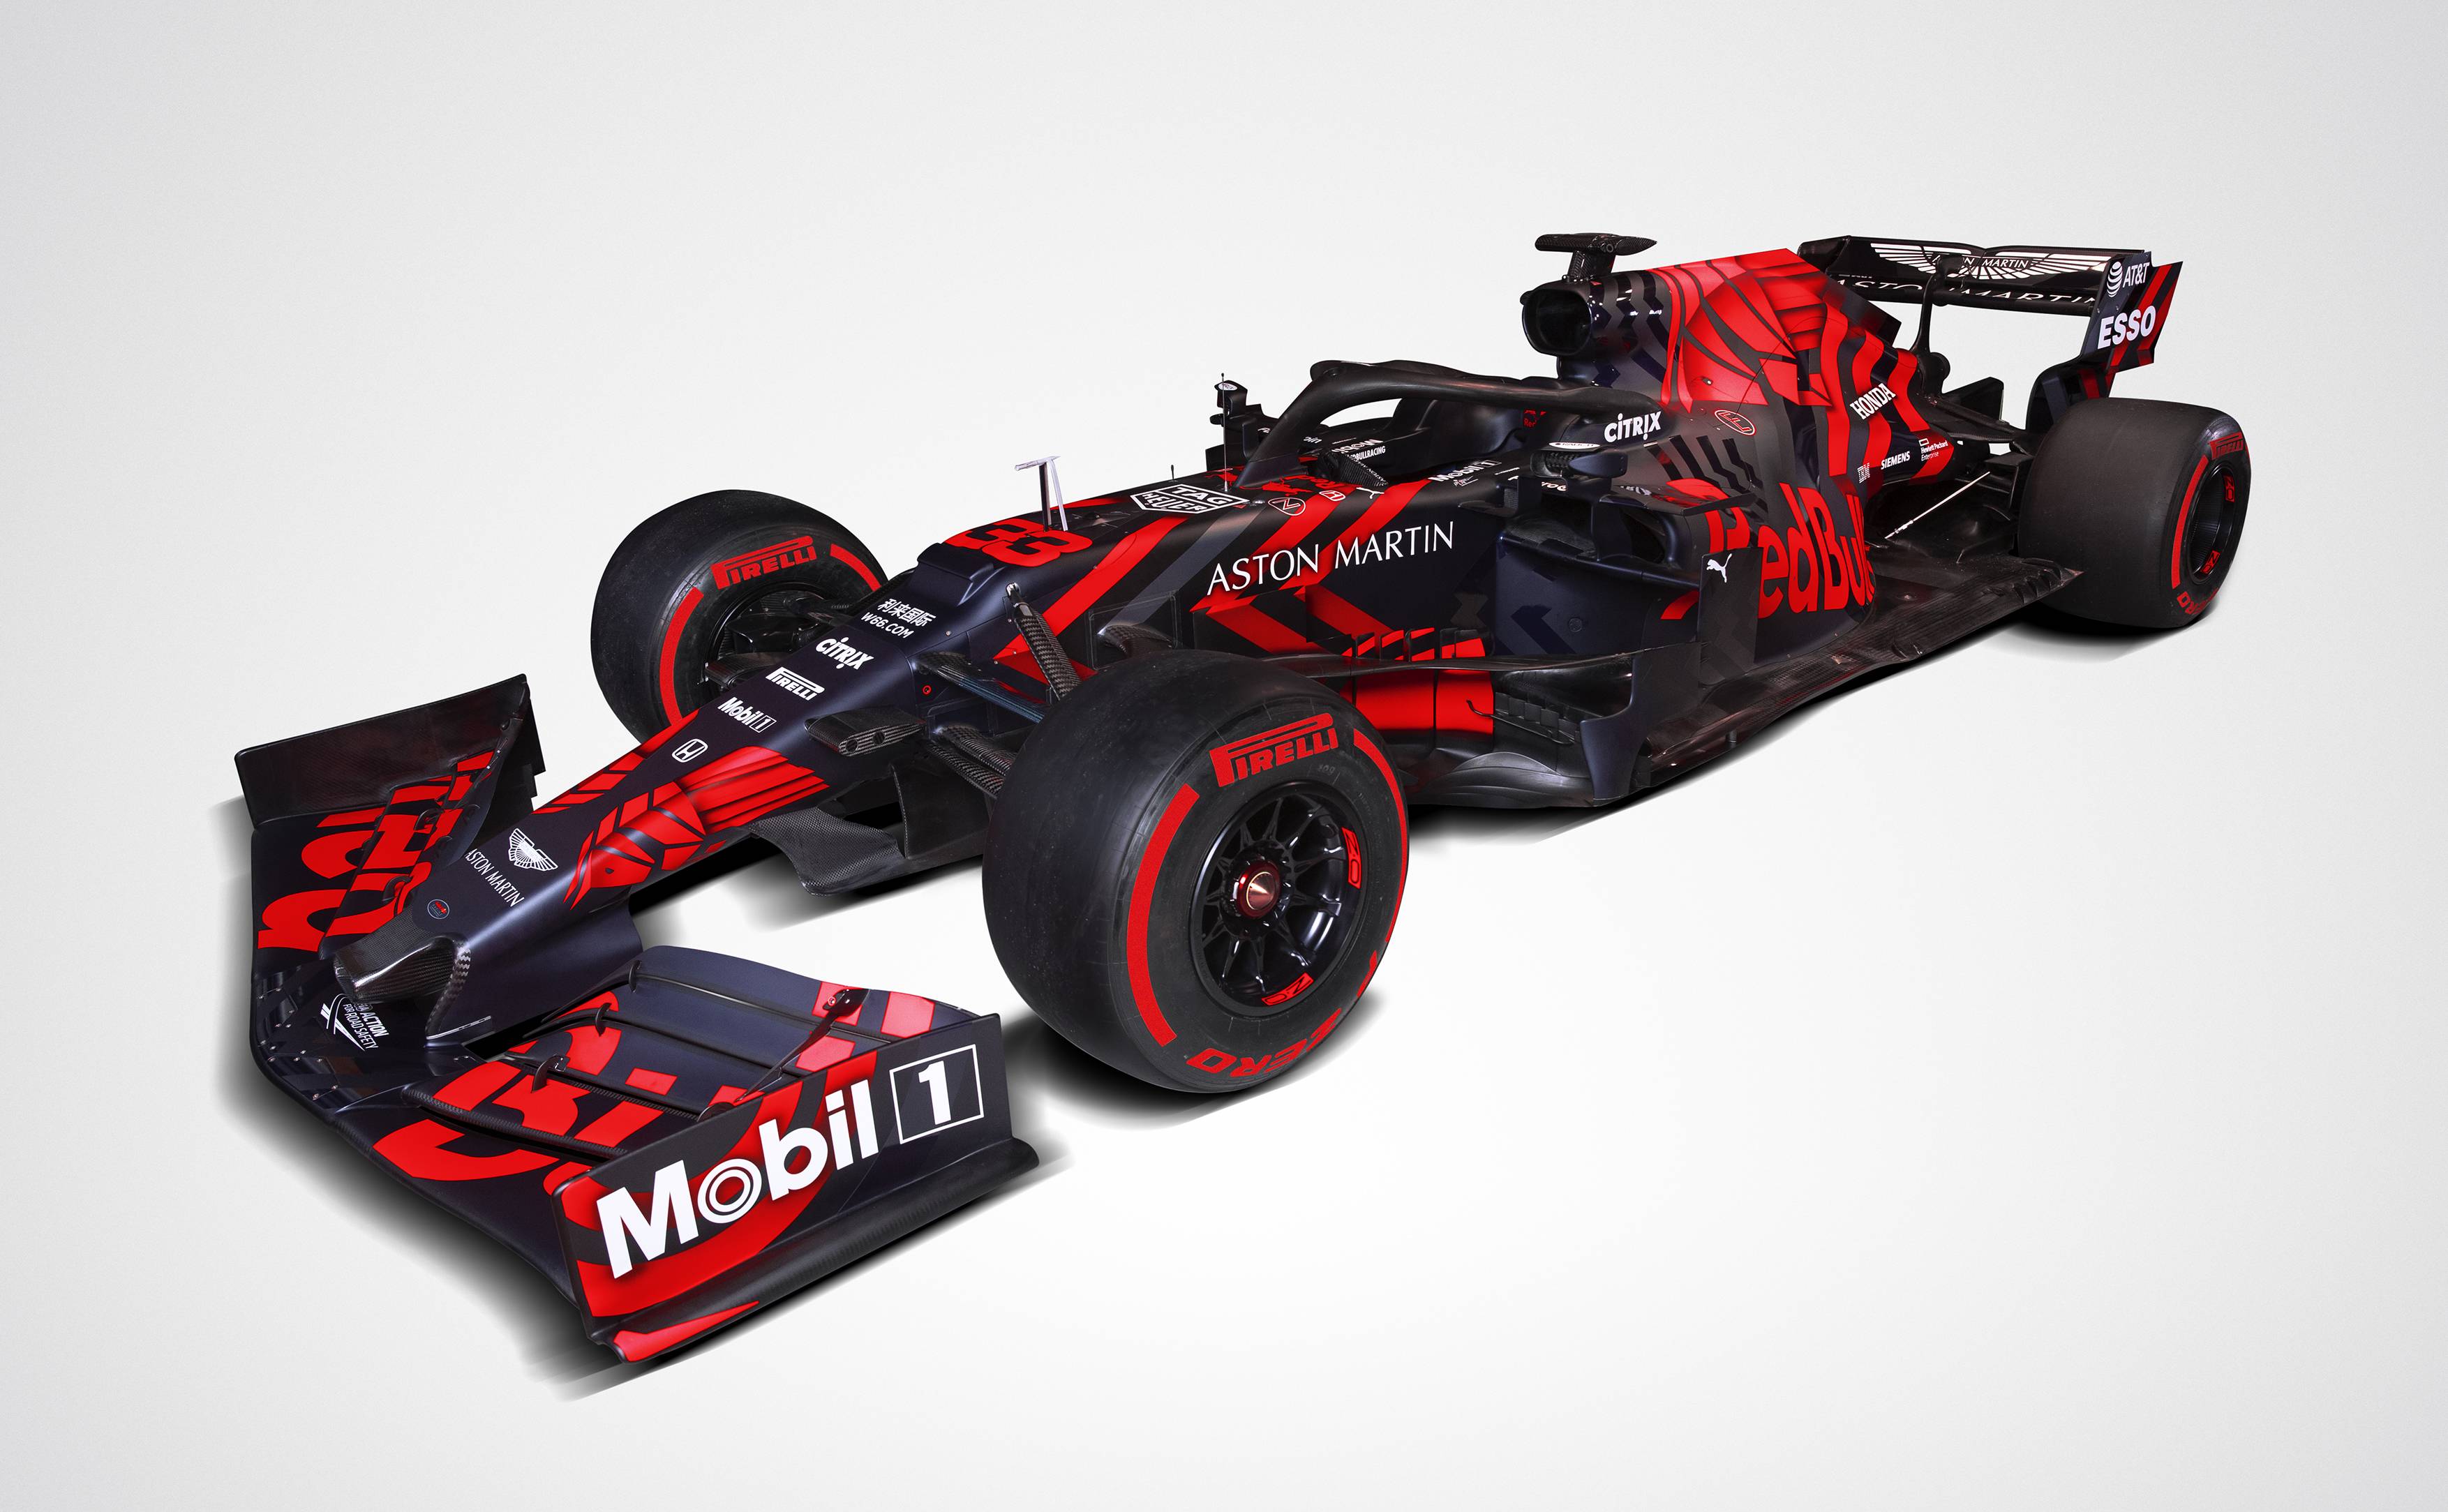 The 2019 Aston Martin Red Bull Racing RB15